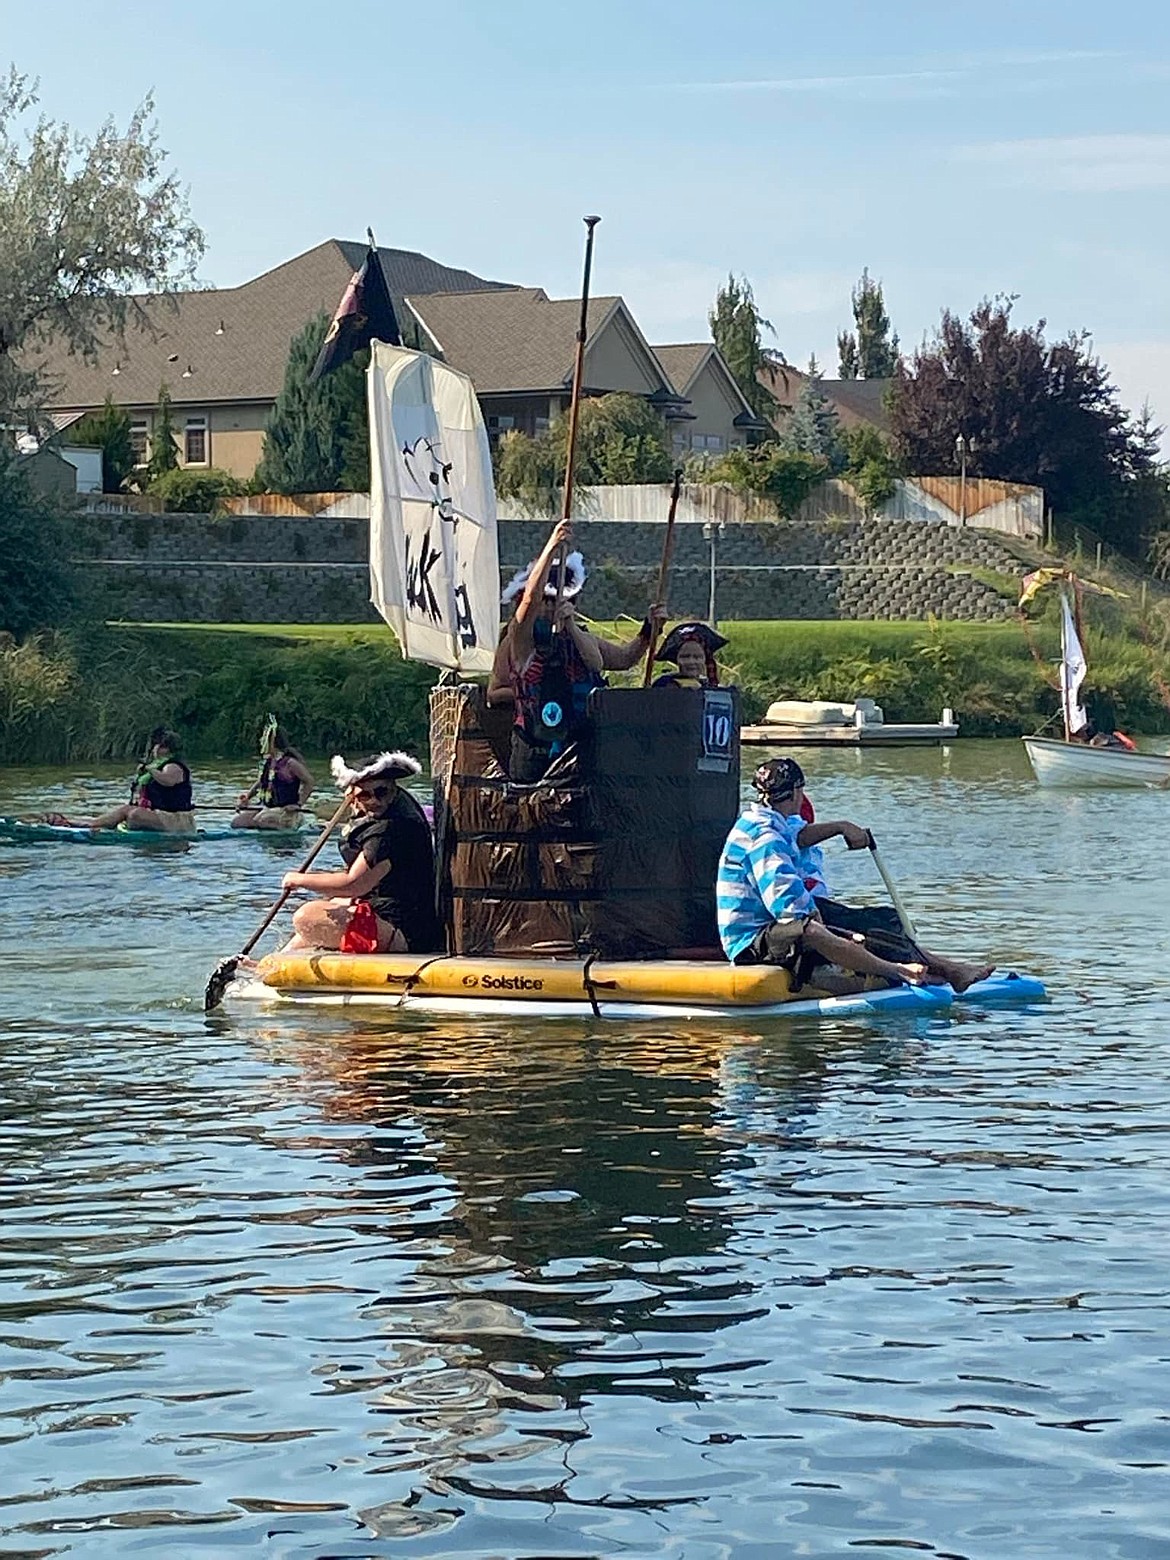 The homemade vessels are put together by mending together kayaks, canoes, paddle boards and more. Vessels are awarded prizes fitting into six different categories.